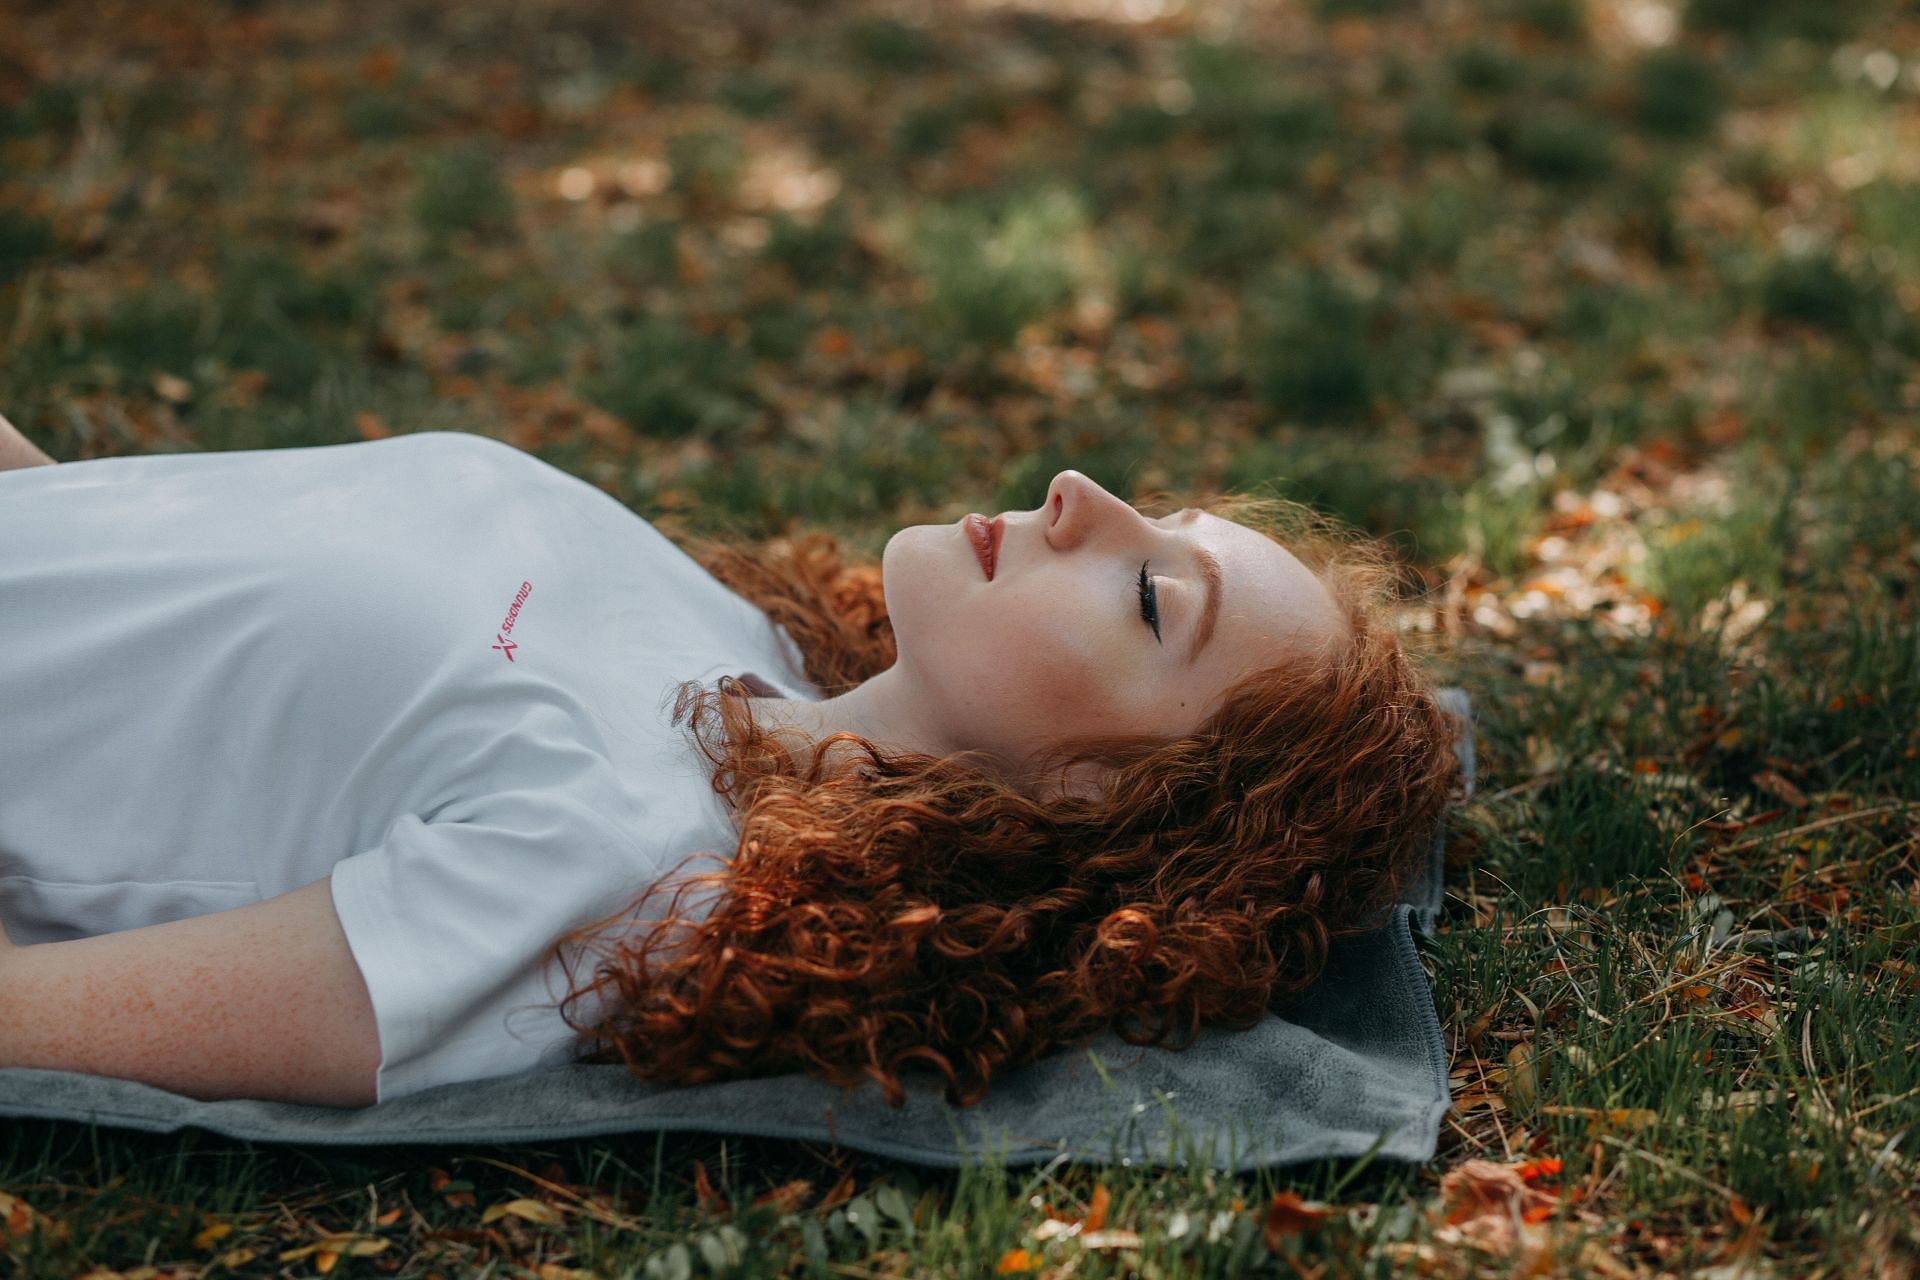 The corpse pose helps in relaxing the muscles. (Image via Pexels/Natalie Bond)